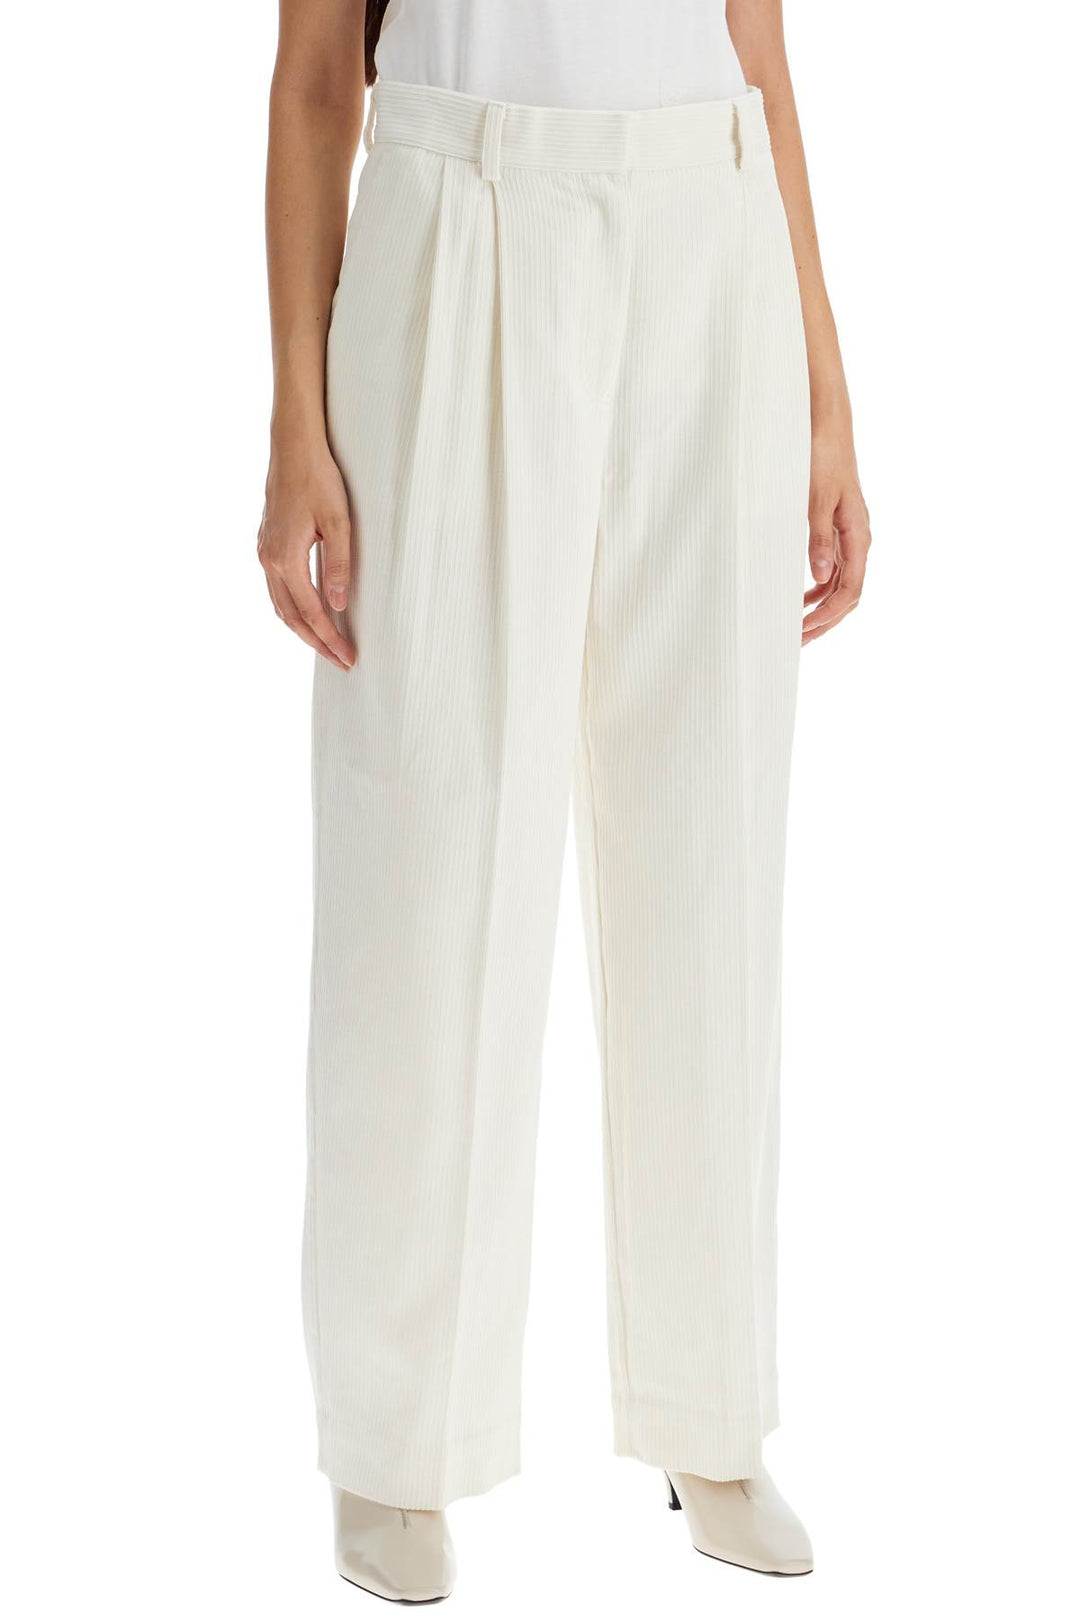 Toteme Silk And Cotton Corduroy Pants Made   White